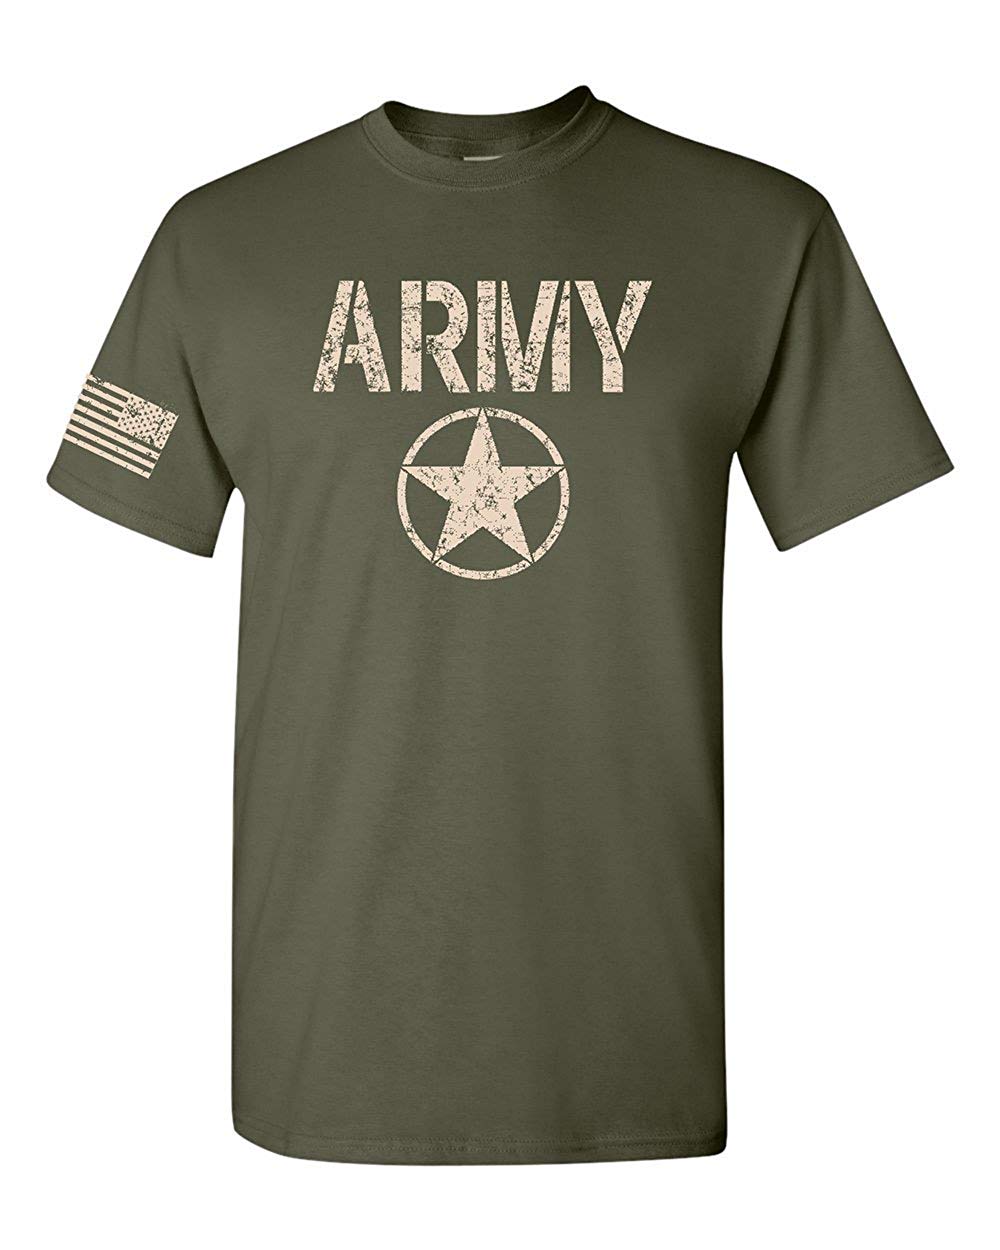 All-Star Clothing and Apparel Logo - Amazon.com: All Things Apparel US Army Star With Flag On The Sleeve ...